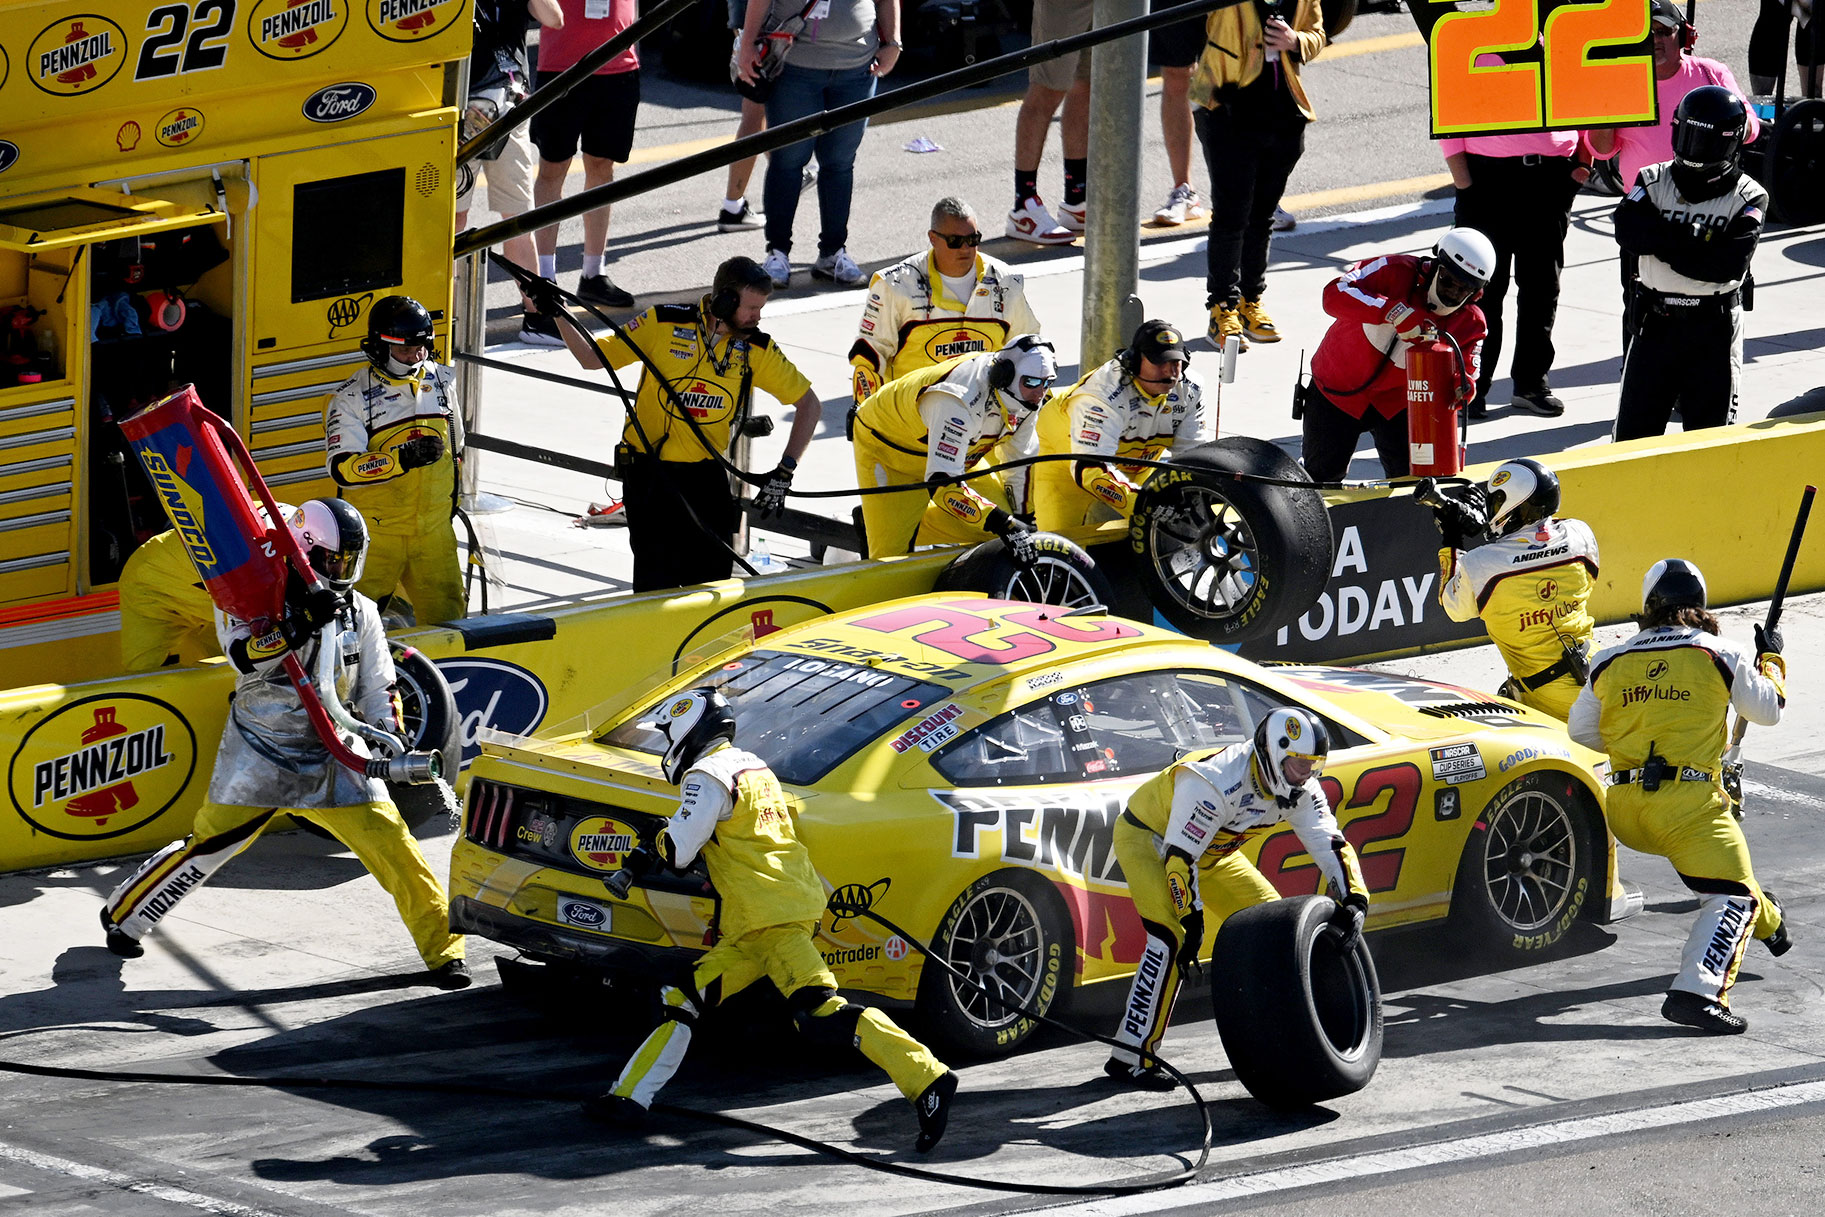 Pit Crew changing tires